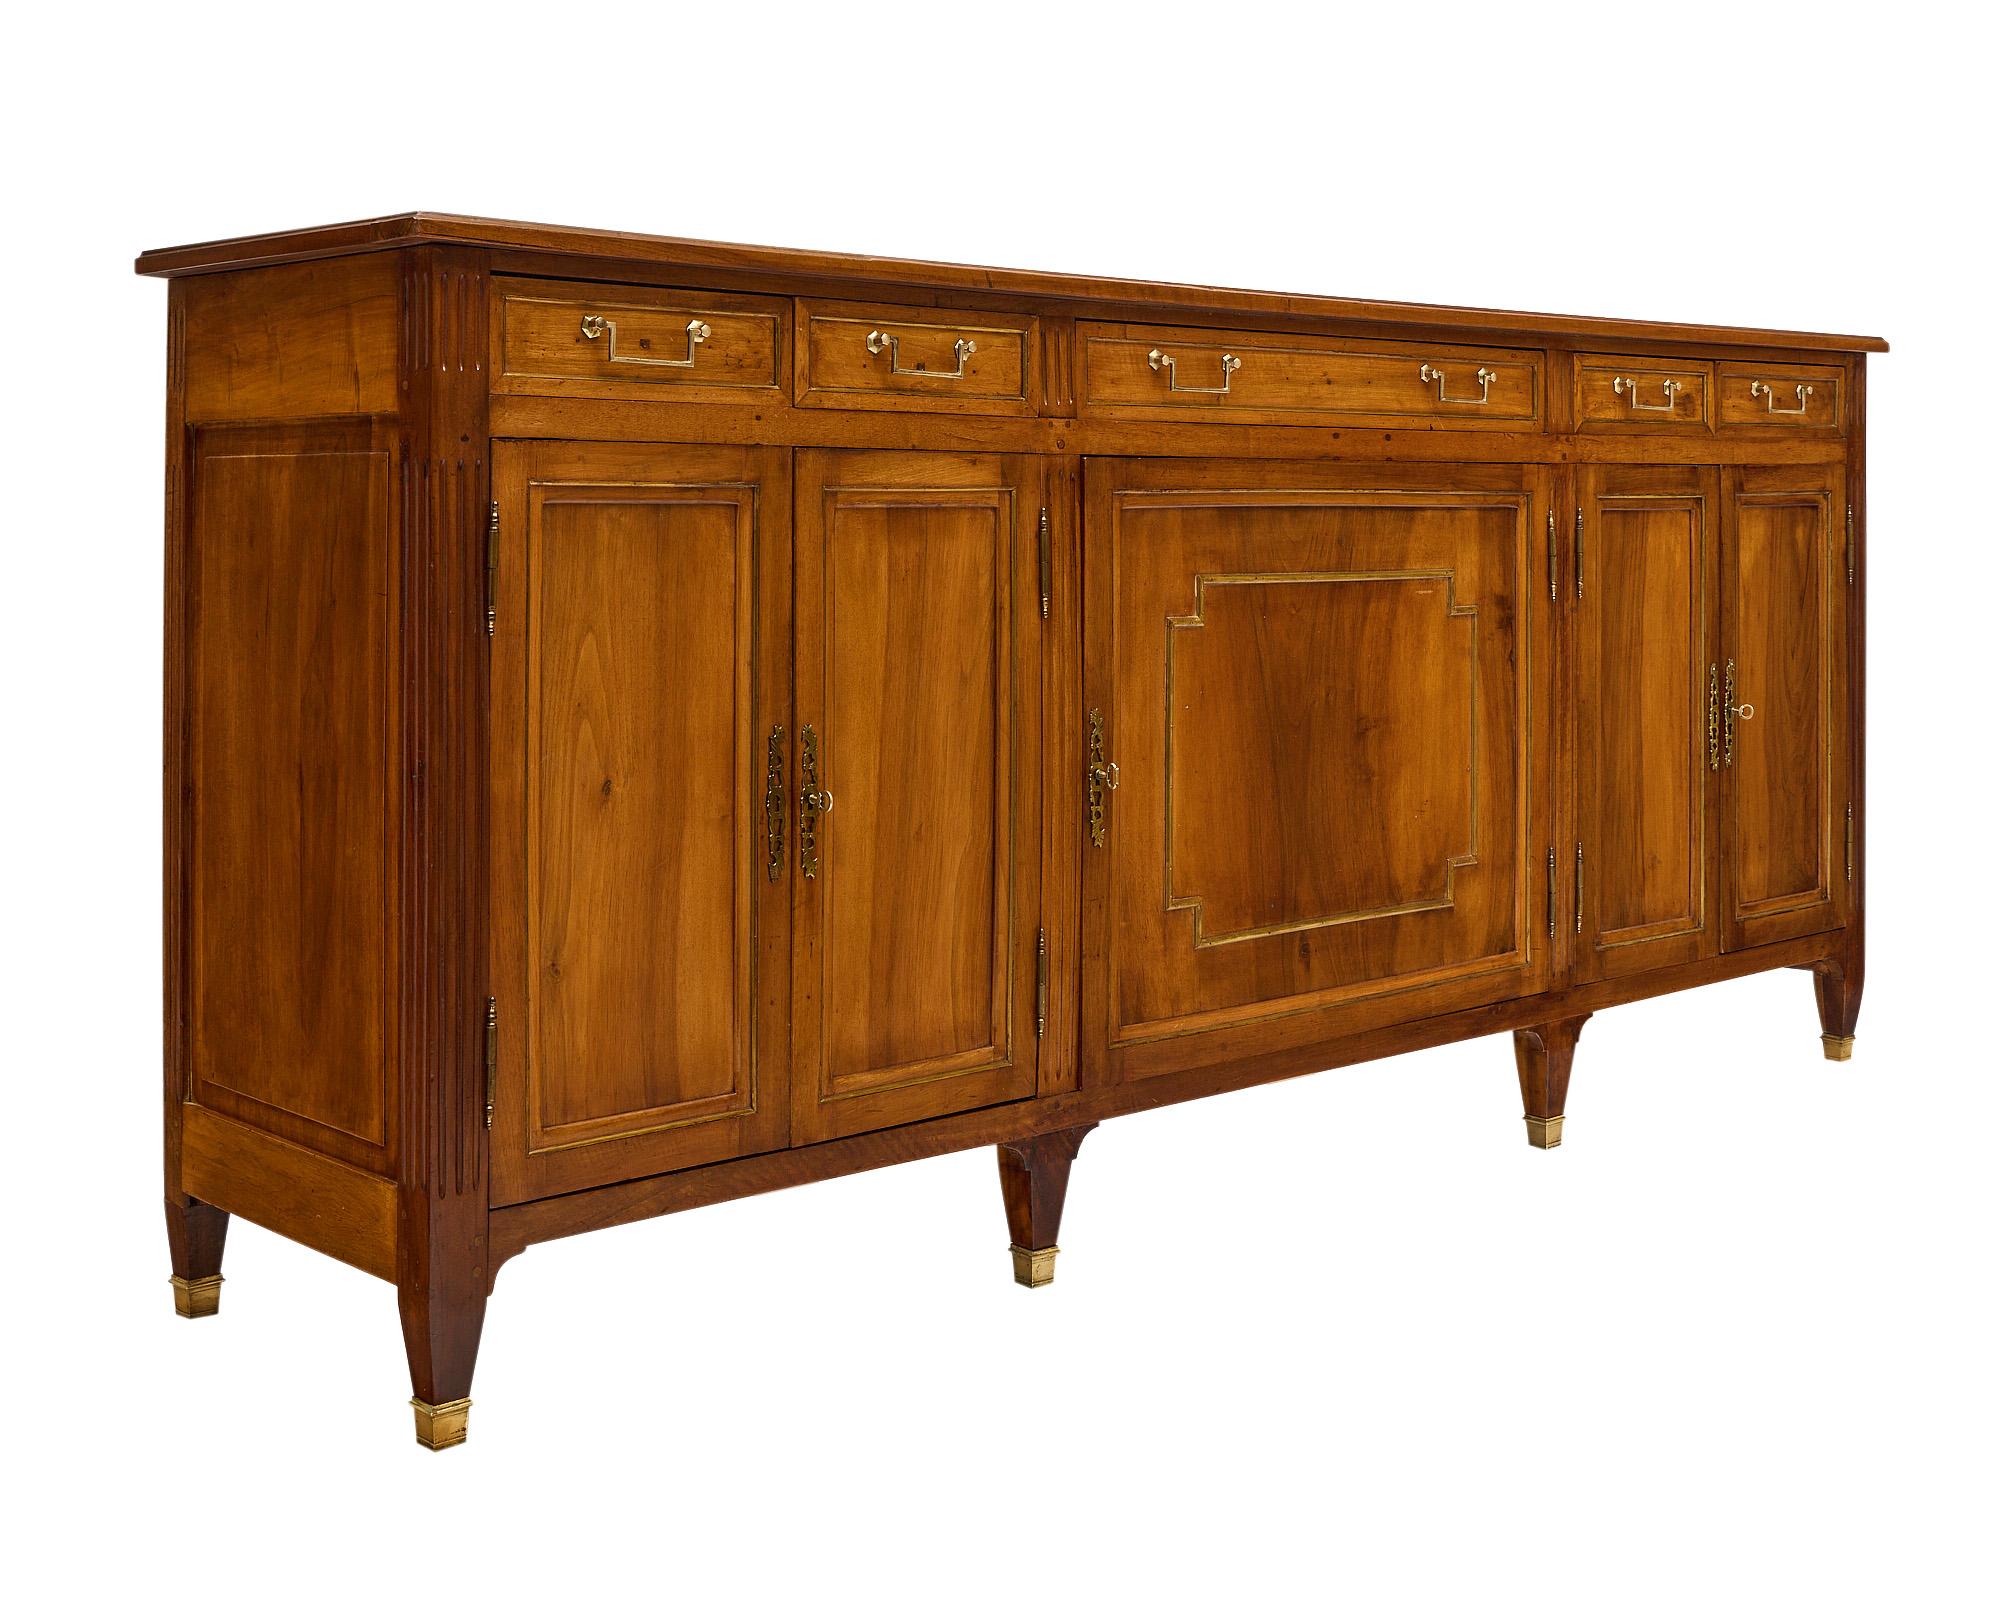 Buffet from France in the Directoire style. This warm walnut piece has five dovetailed drawers above three sets of doors that open to interior shelving. The case piece features brass hardware and trim throughout. It is supported by tapered legs, six